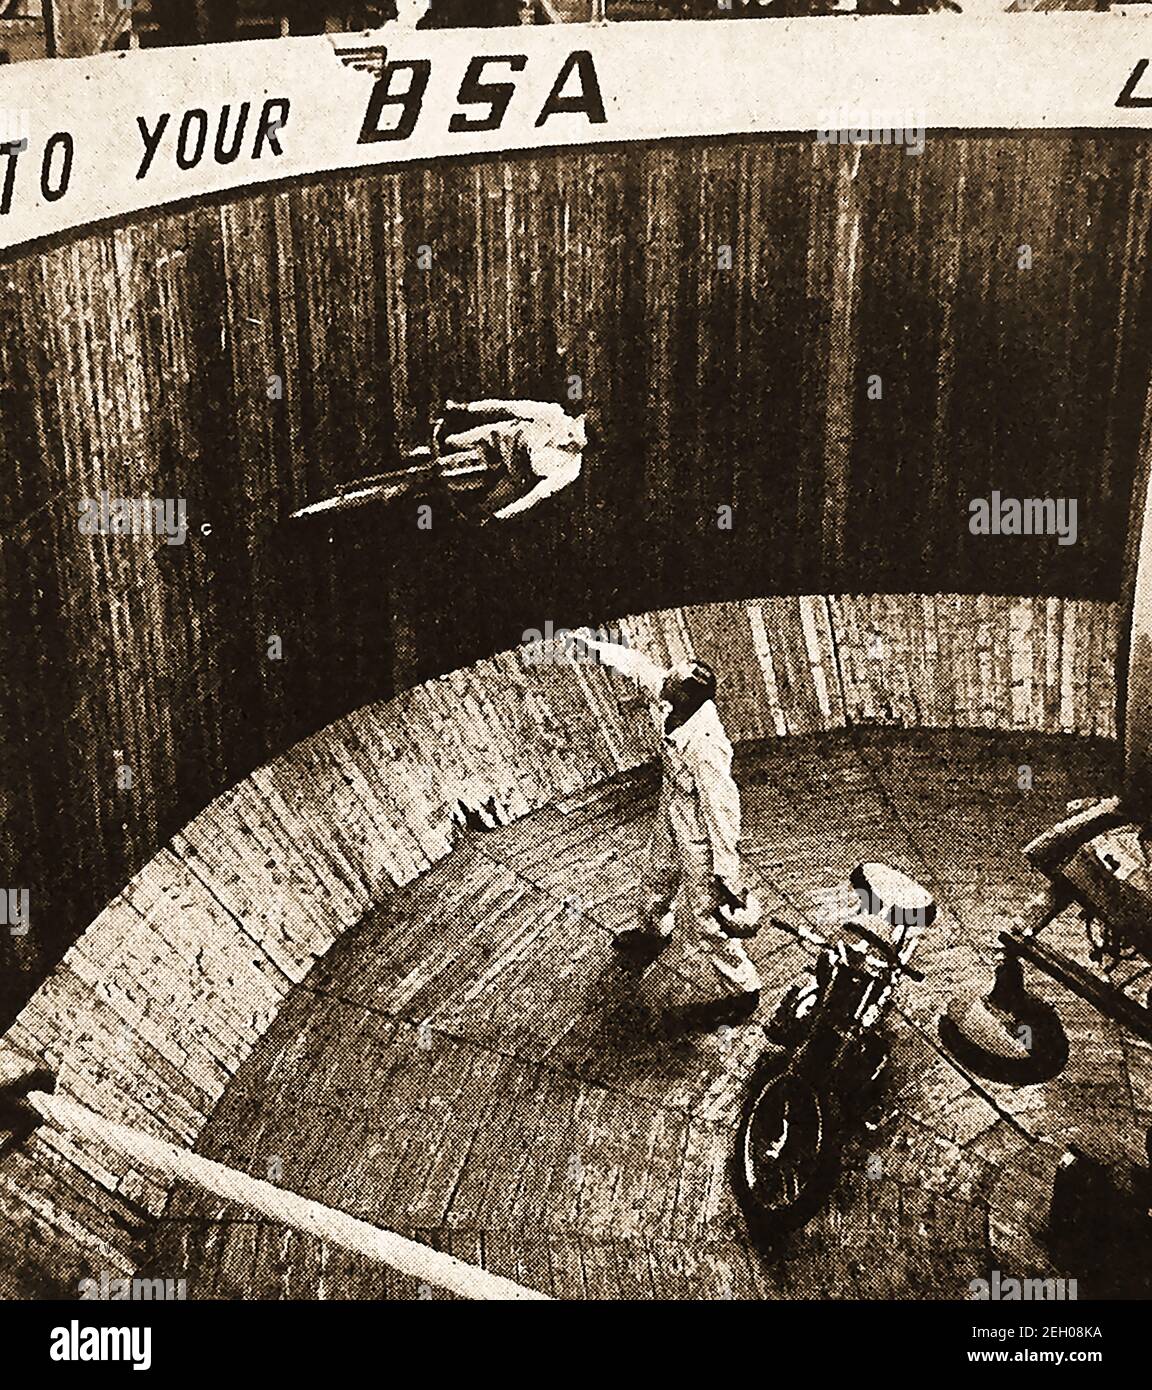 An early printed photograph showing motorcyclist performing on the Wall of Death at the Kursall, Southend, England. The Kursaal is a Grade II listed building  noted for its architectual style and  domed top in Southend-on-Sea, Essex, England.  It opened in 1901 as part of one of the world's first purpose-built amusement parks. The wall of death (sometimes known as The wall of death, motordrome, silodrome or well of death  is a wooden planked barrel shaped arena where spectators watch from the top as  motorcycles or other motorised  vehicles ride aroun it at speed,often performing other stunts. Stock Photo